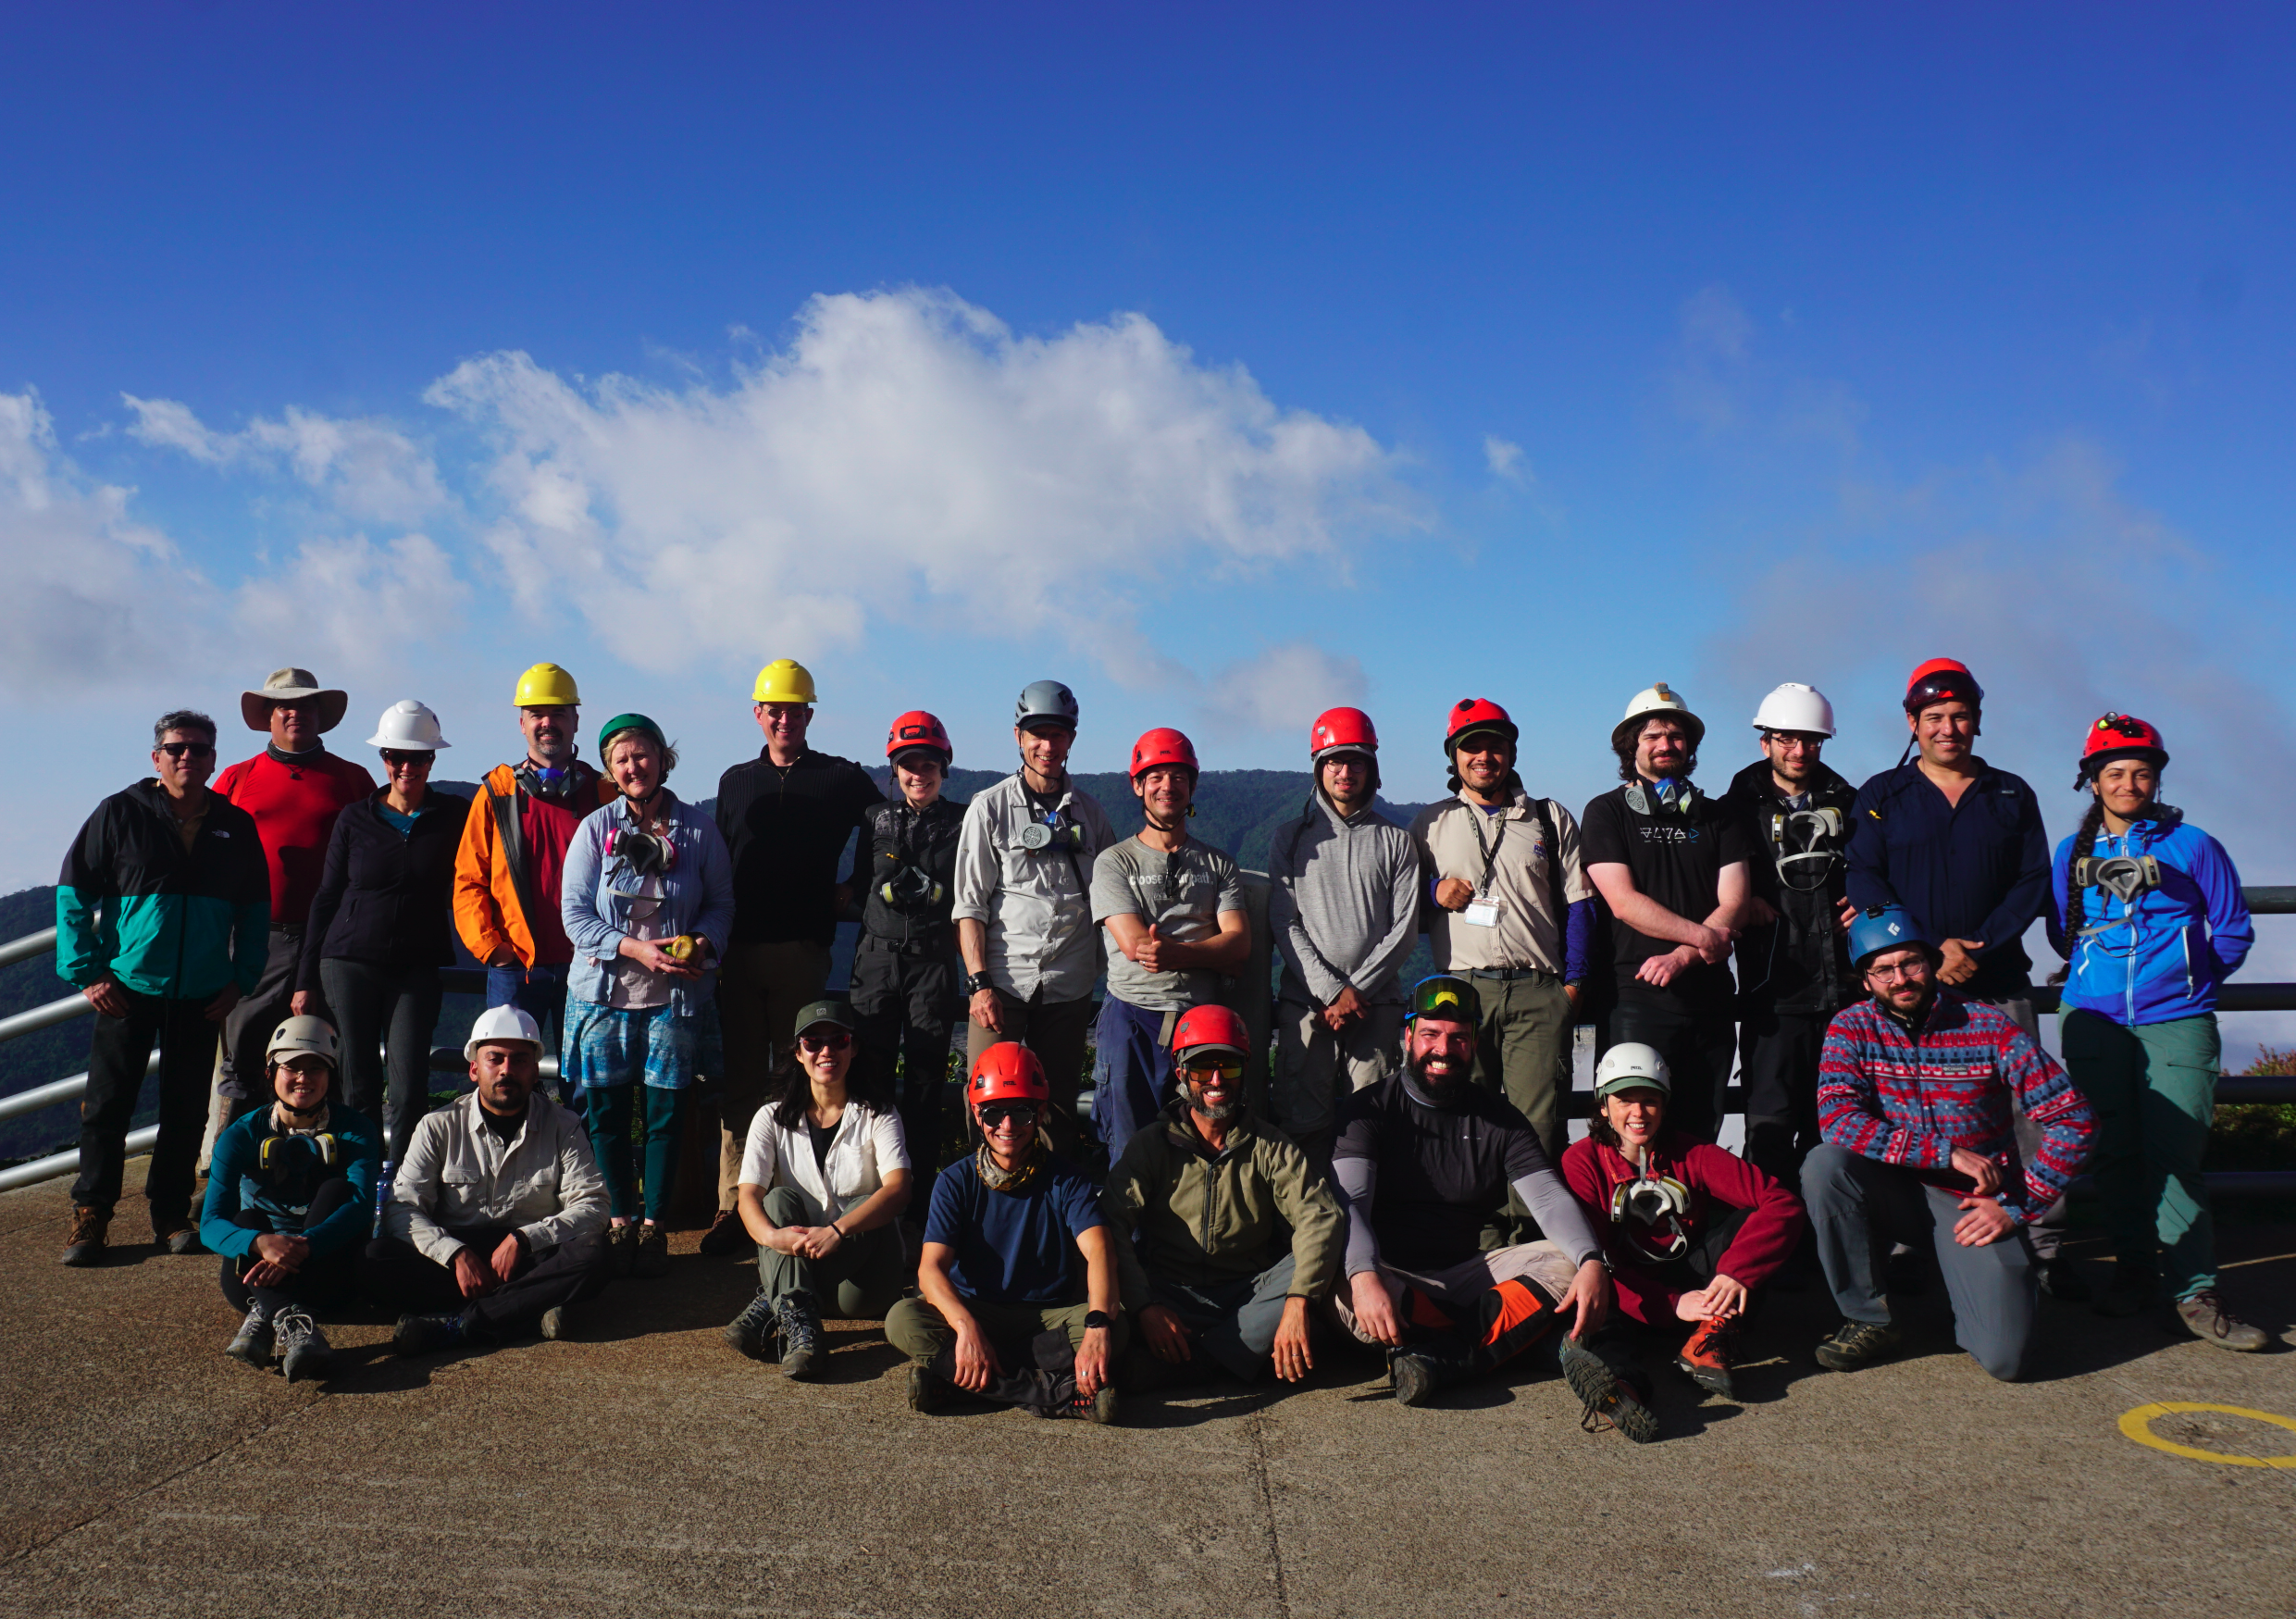 The (majority of) the workshop participants gather for a group photo at the Mirador on the final day.